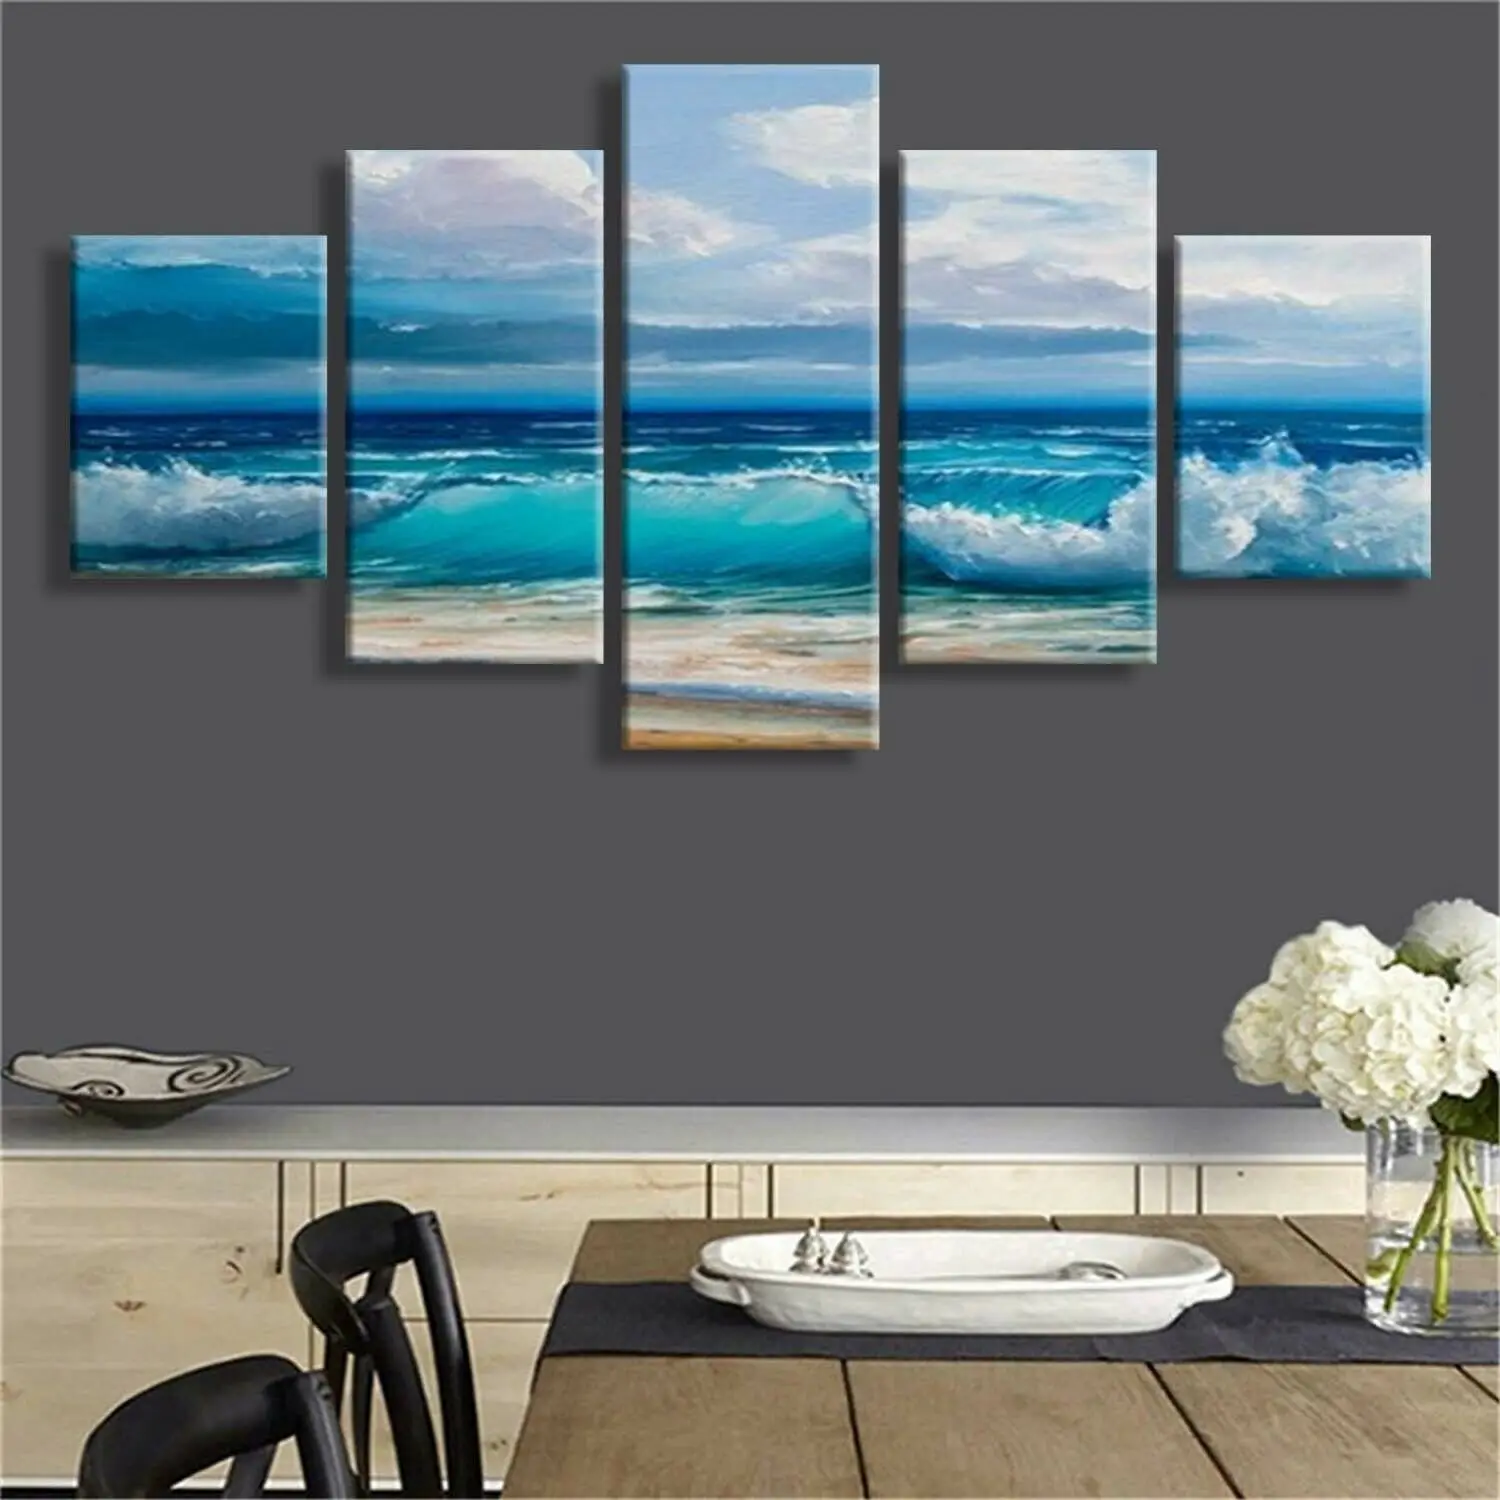 

5 Pieces seascape Poster HD Picture Canvas Wall Art for Living Room Paintings HD Print Room Decor Pictures Home Decor No Framed